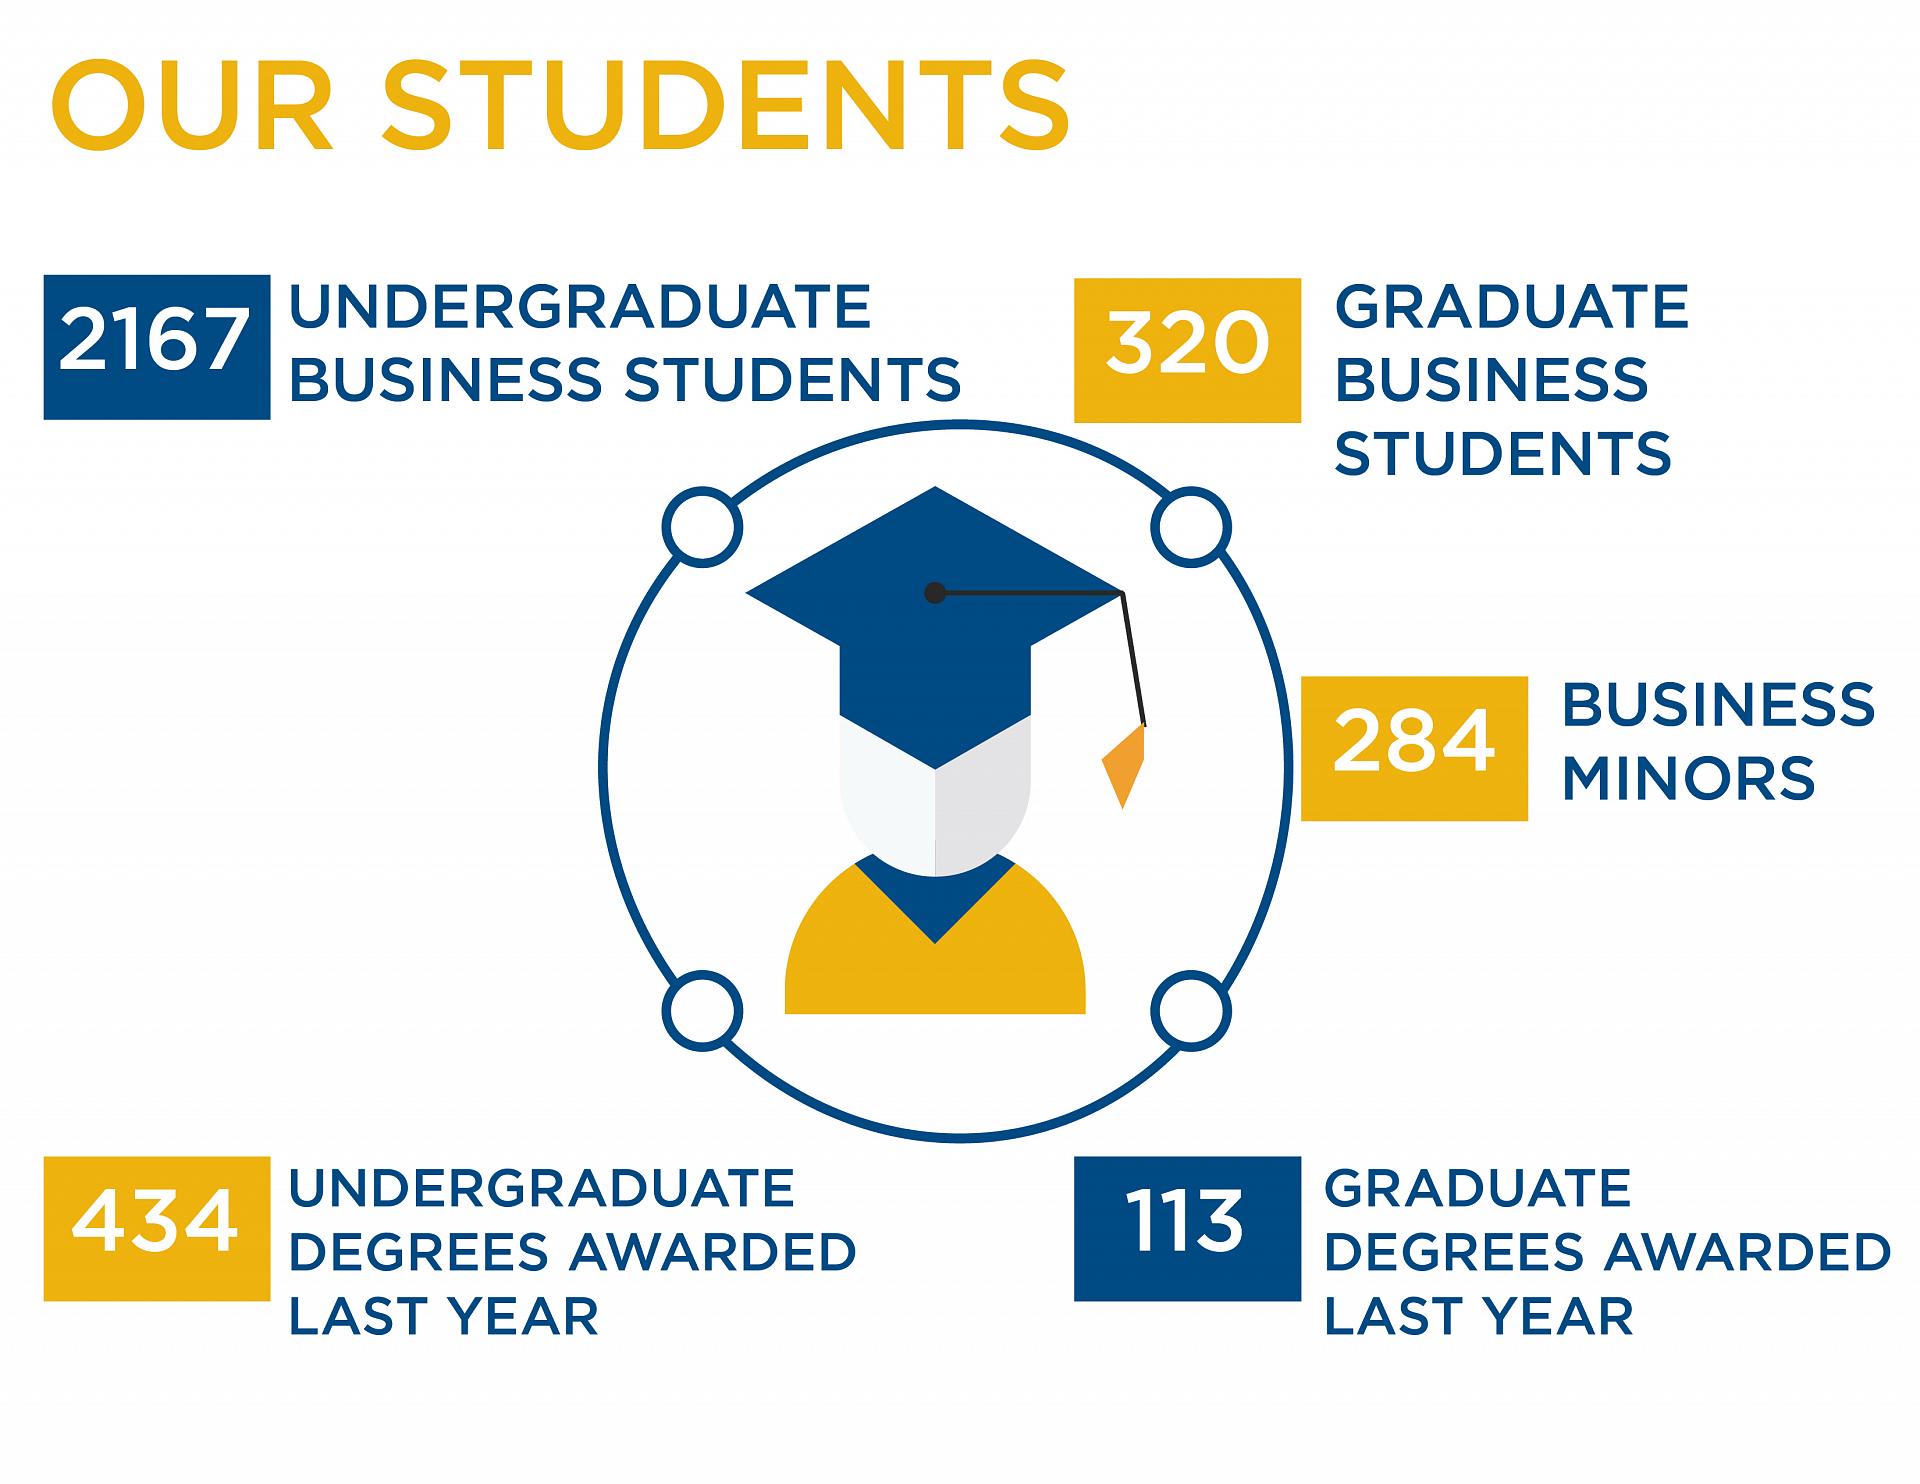 Our Students infographic